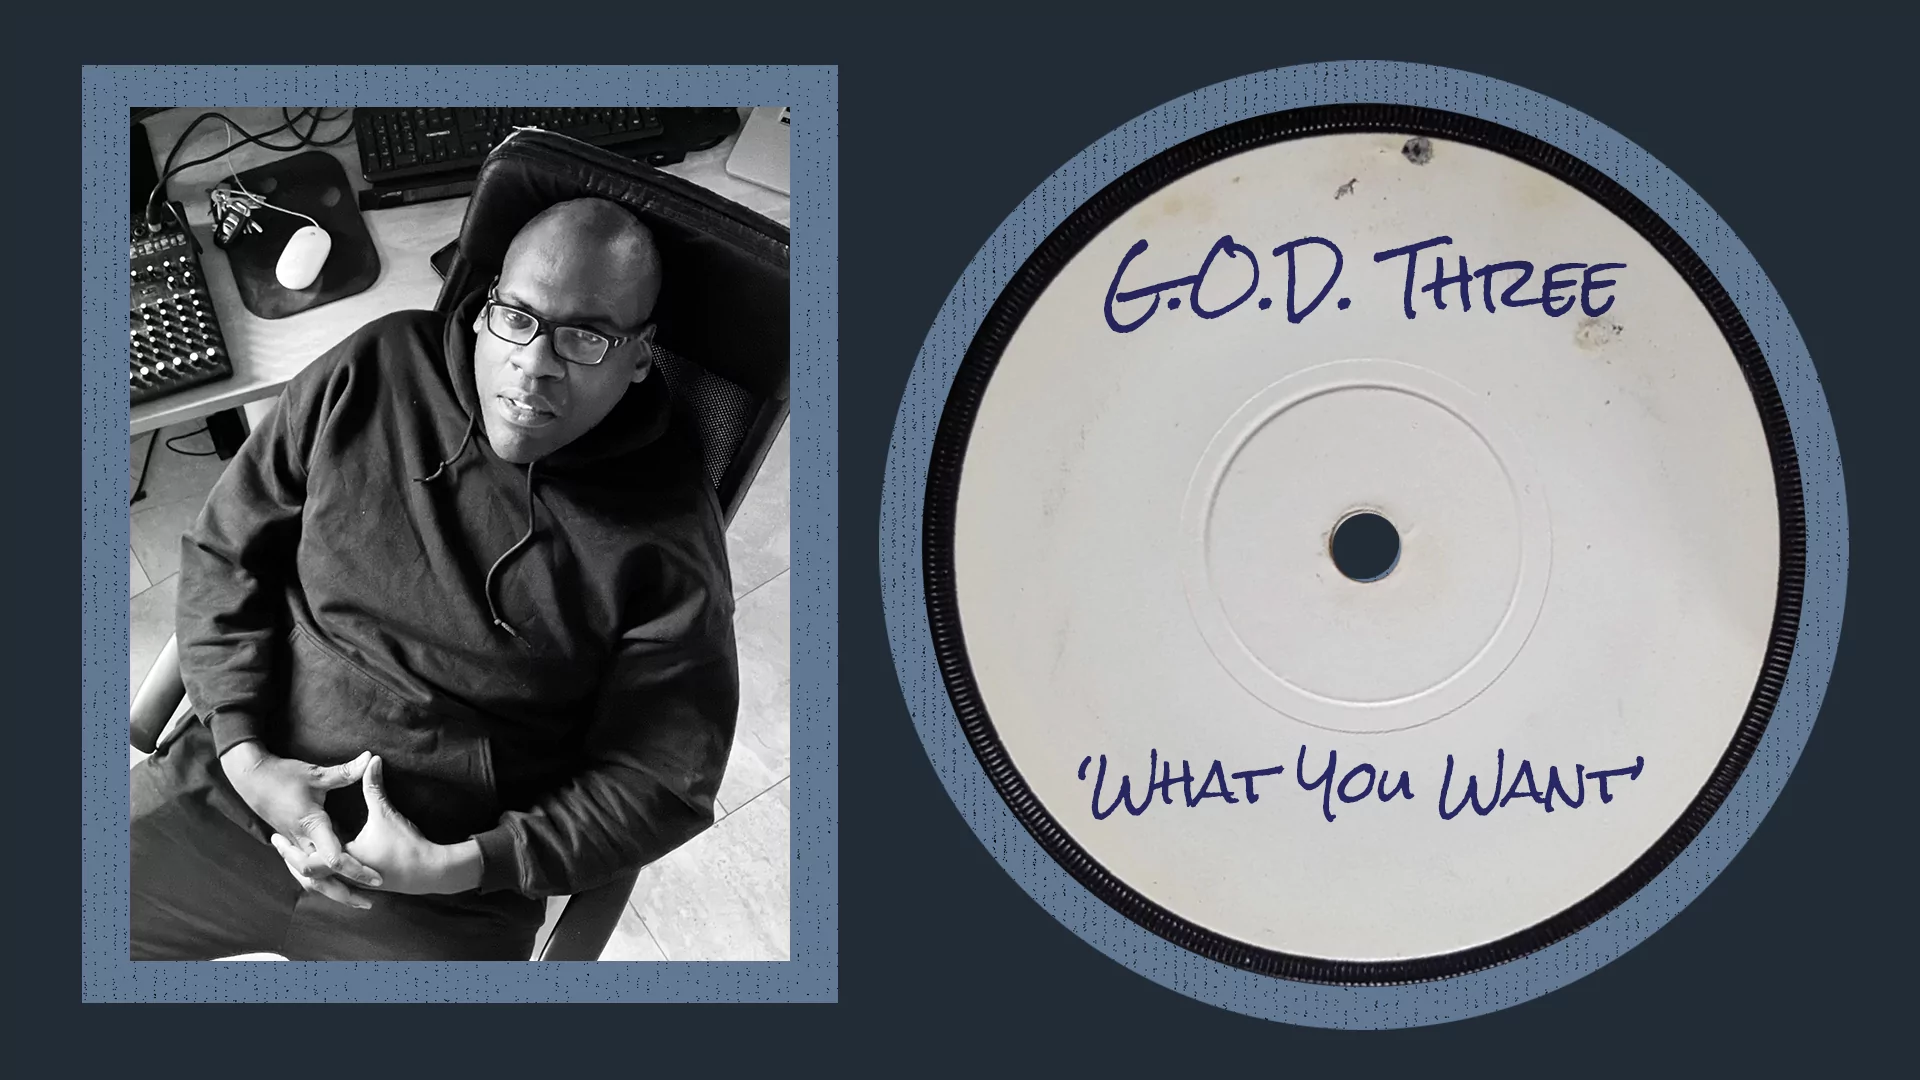 Black-and-white profile image of Jeremy Sylvester with G.O.D. Three, 'What You Want' dubplate